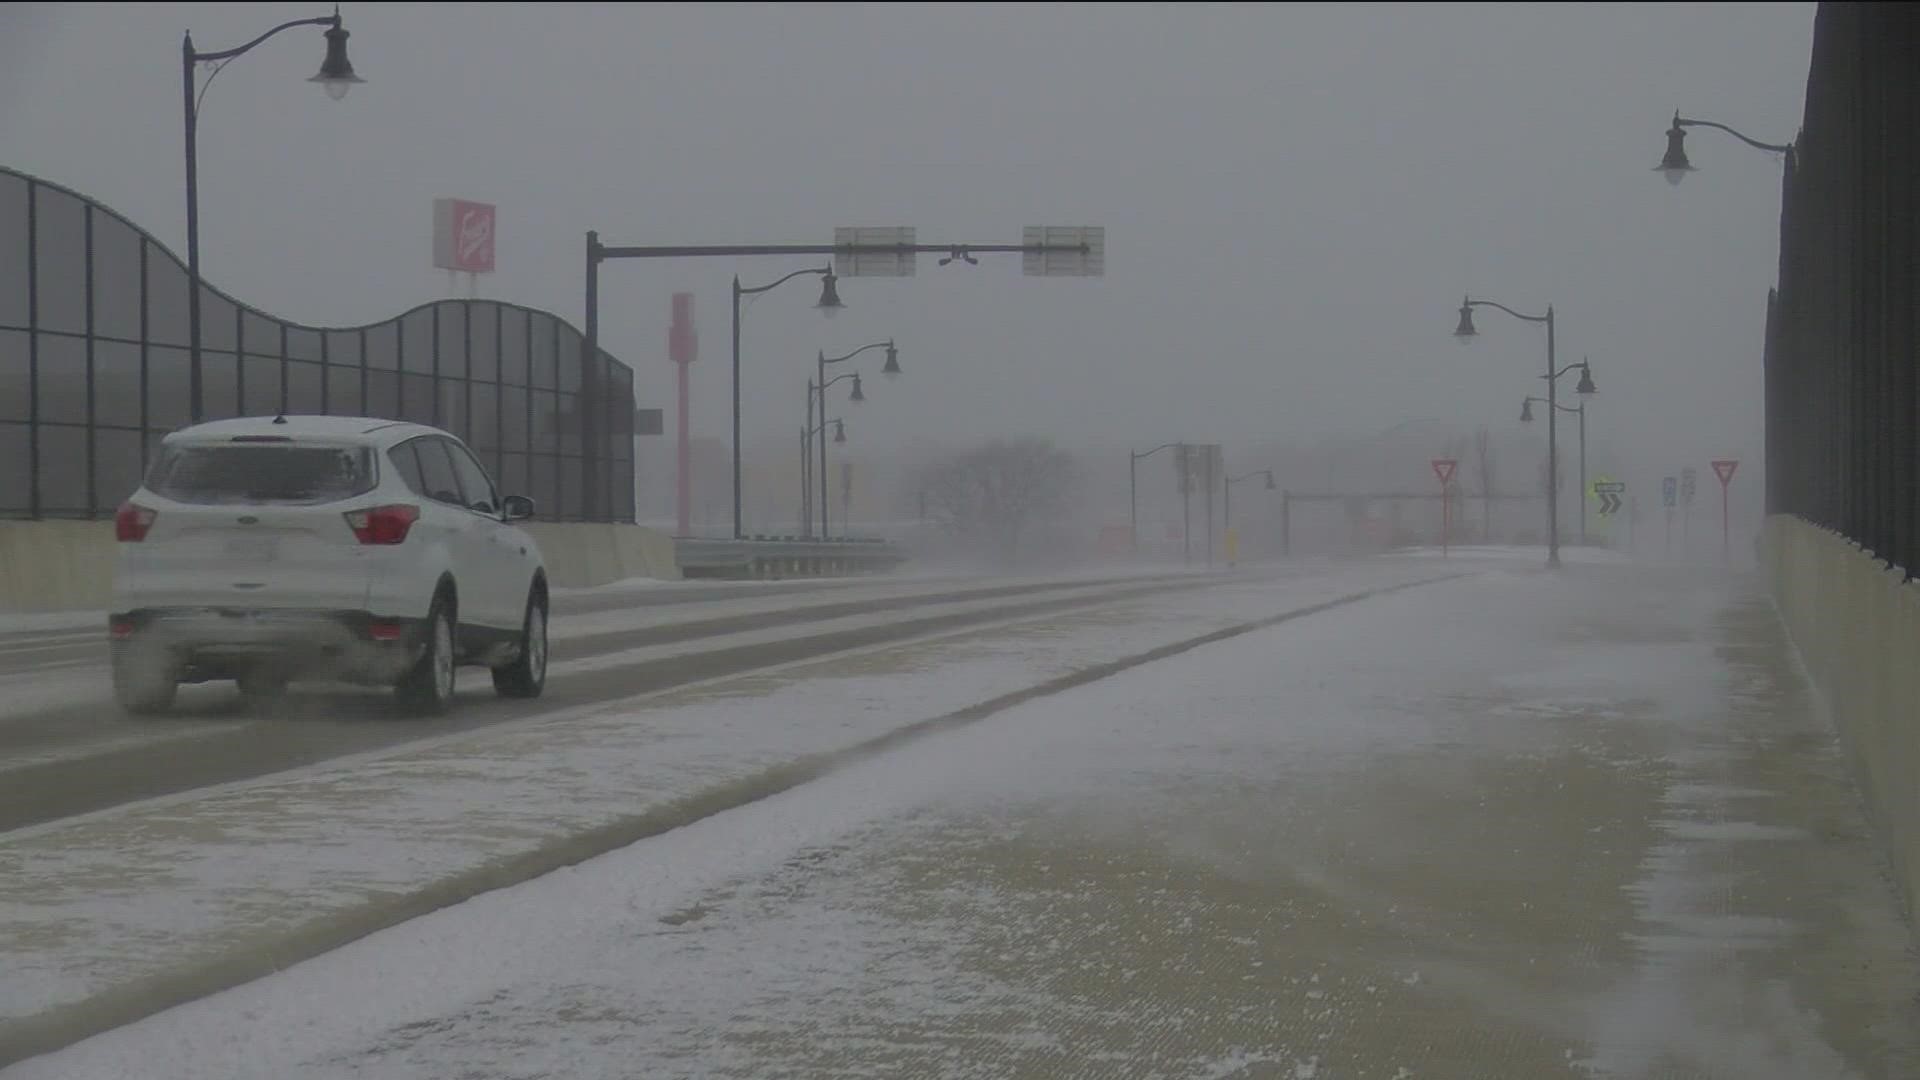 WTOL 11 spoke with AAA on what to know before the projected ALERT DAY on Wednesday which is forecasted to bring snow accumulation and slow travel conditions.